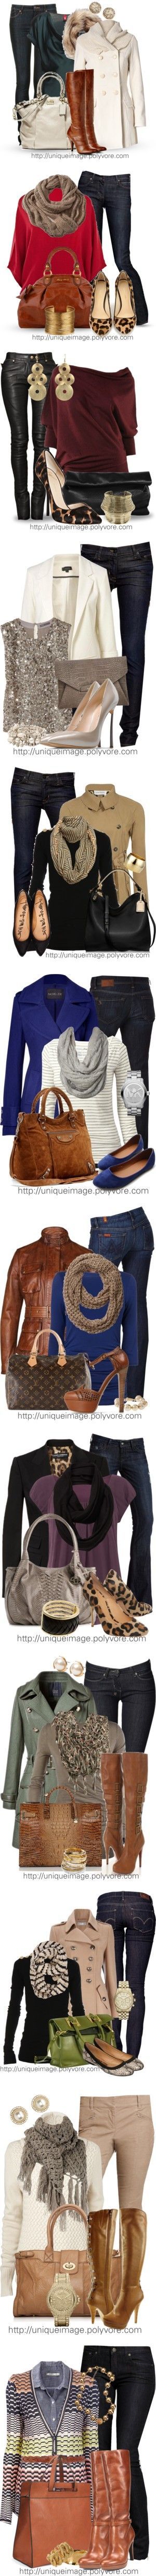 Fall/Winter Outfit Ideas. Lots of fab ideas here.